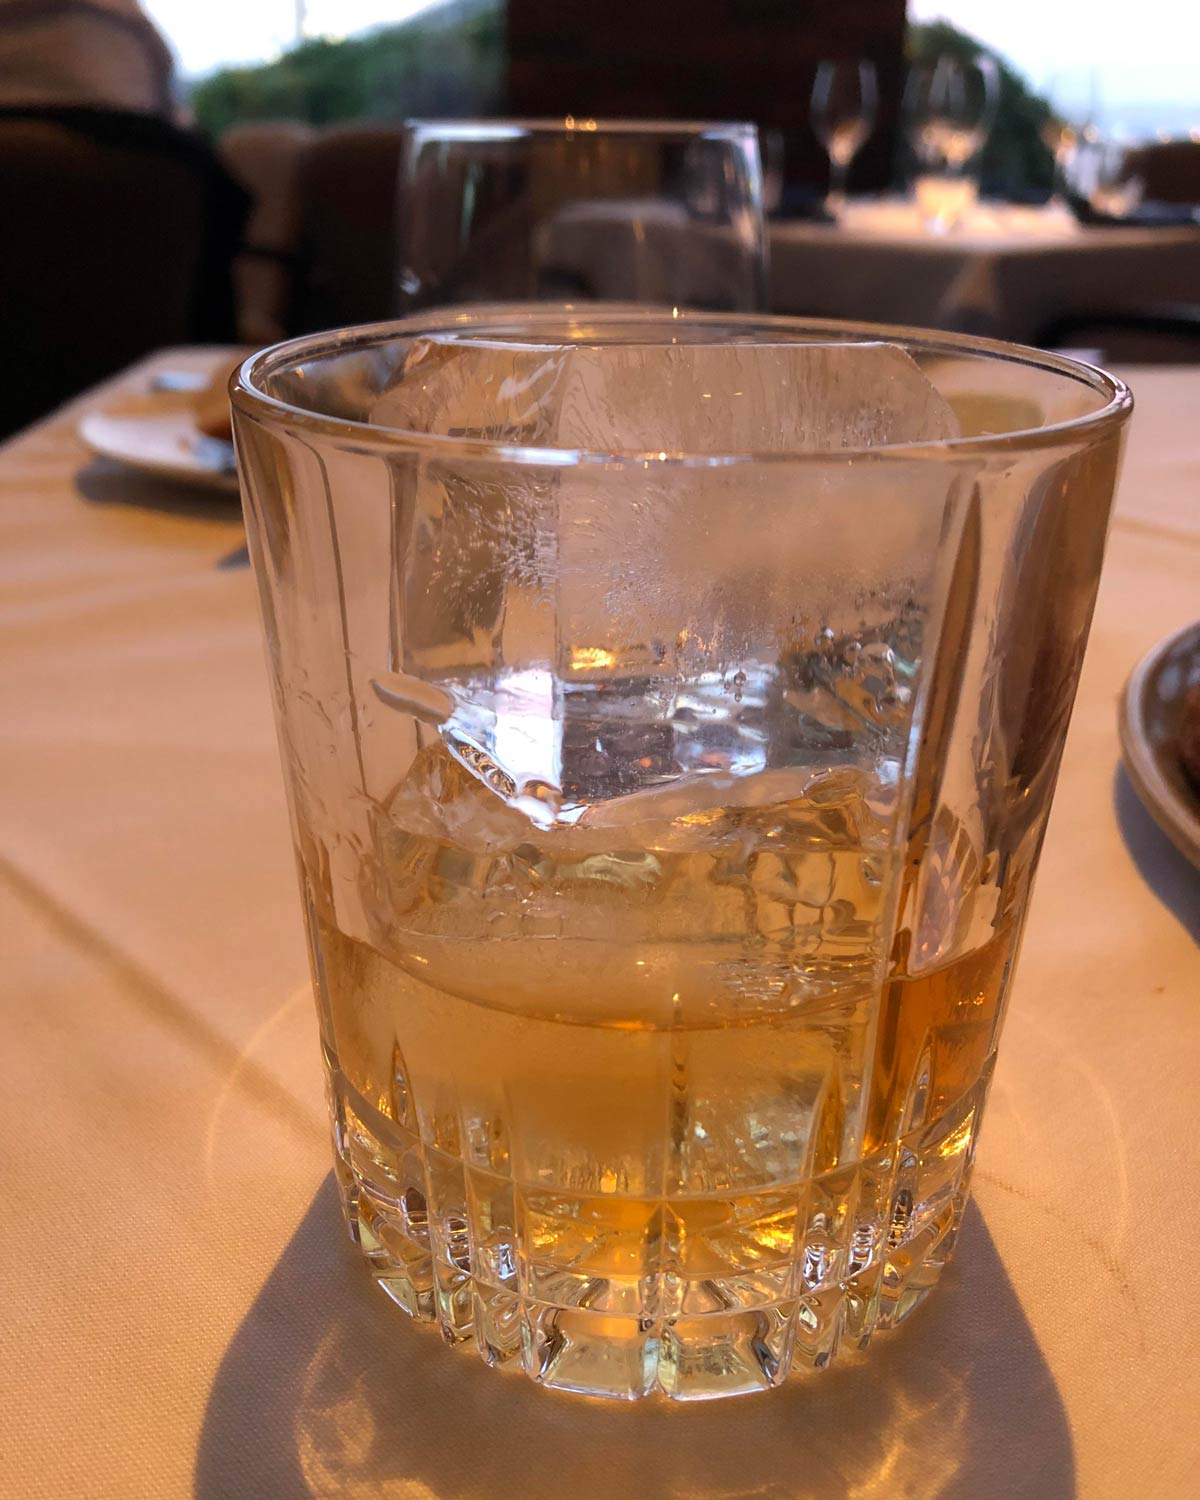 I ordered whiskey straight. Waiter asked if I wanted ice and I said yes. While walking away I said “make it a double”. This is what I got